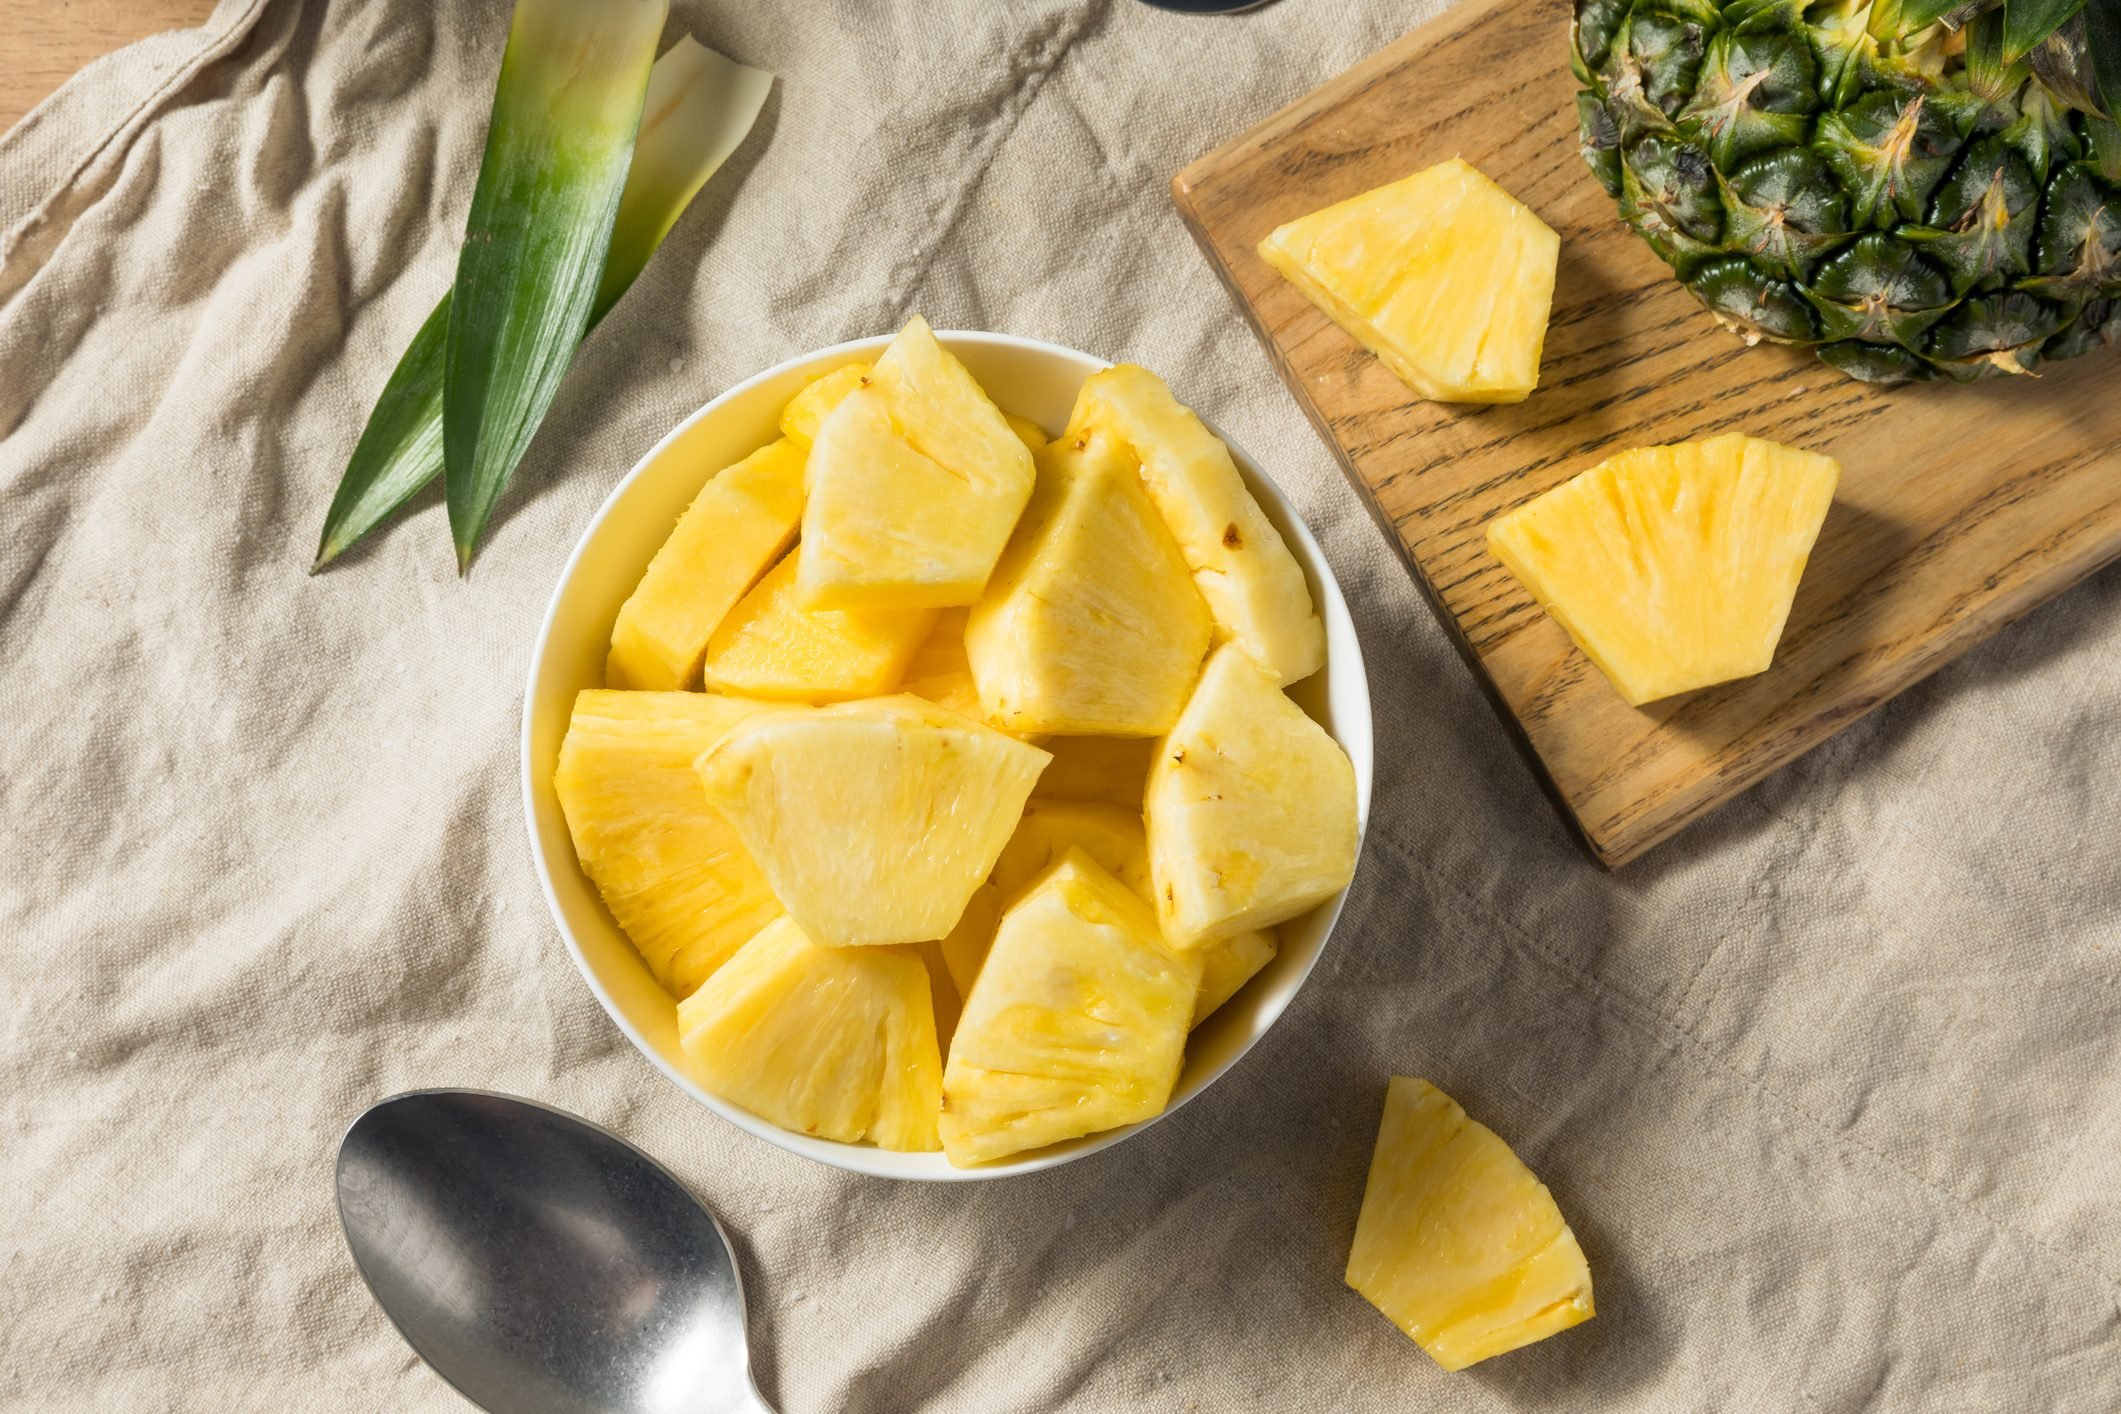 Are Pineapples High in Calories? Here's What RDs Want You to Know